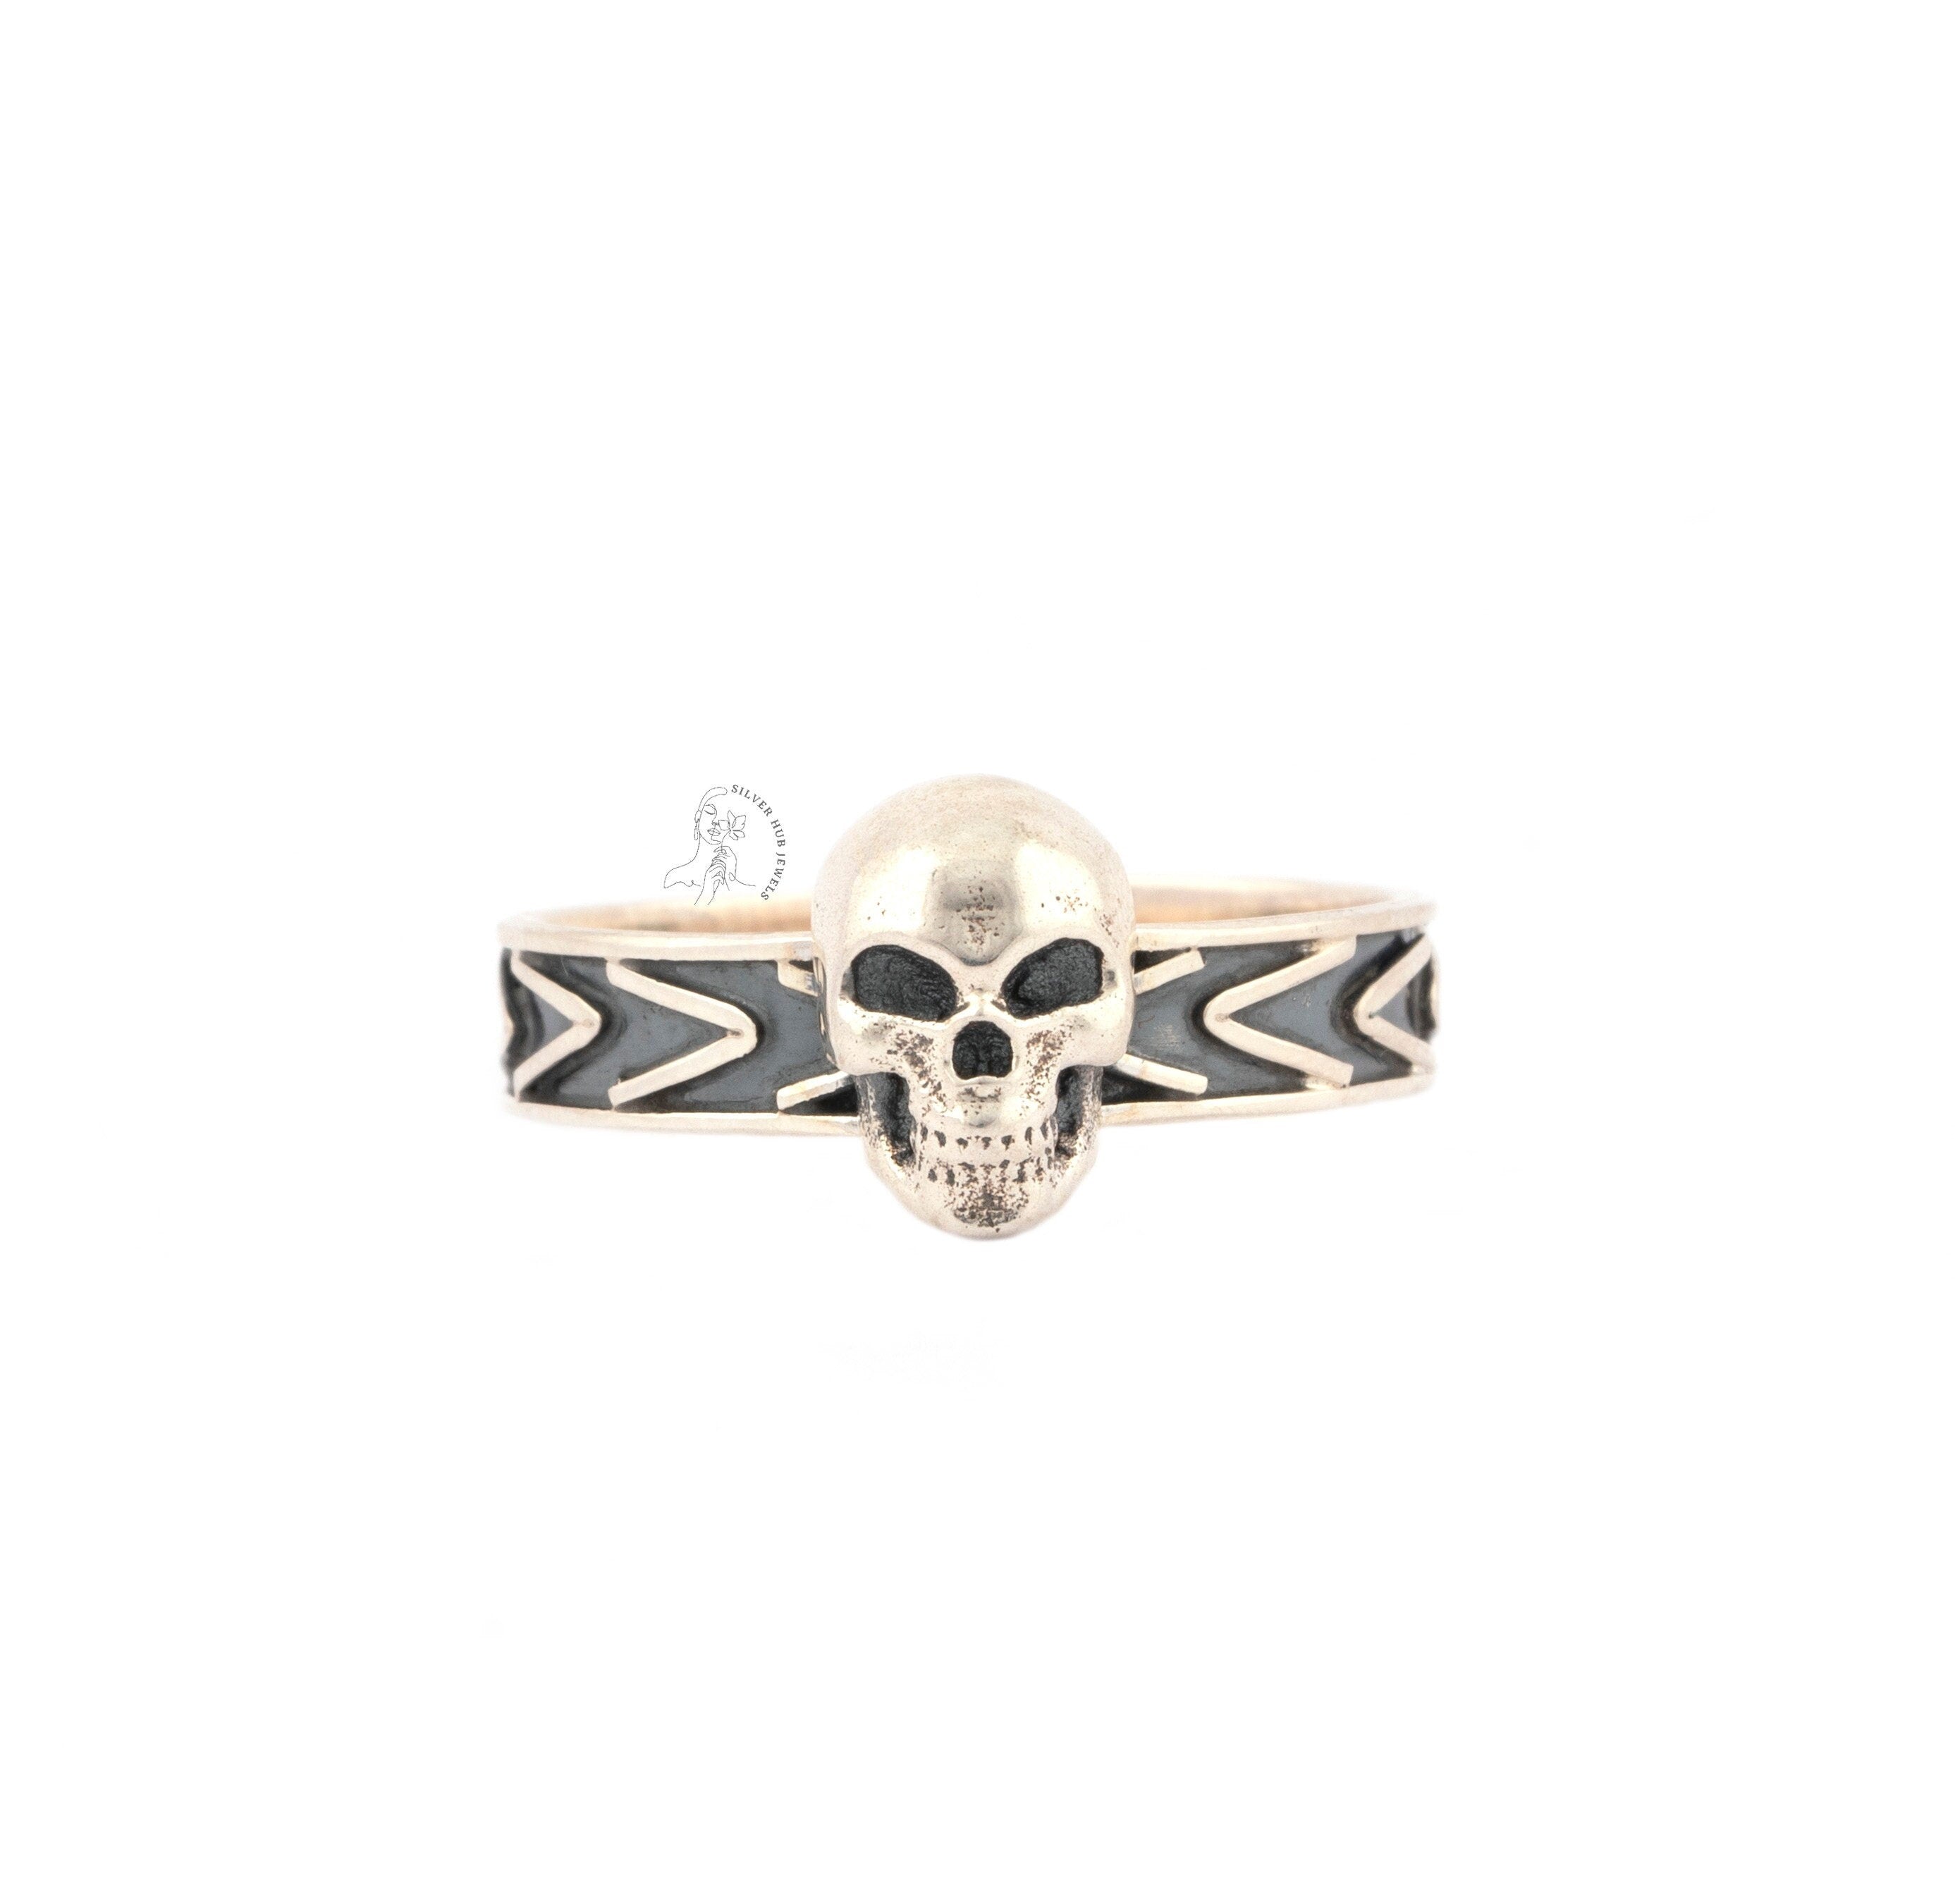 925 Sterling Silver Ring For Enhancing Spirituality, Skull Ring, Aesthetic Ring, Dainty Jewelry, Minimalist Ring For Her